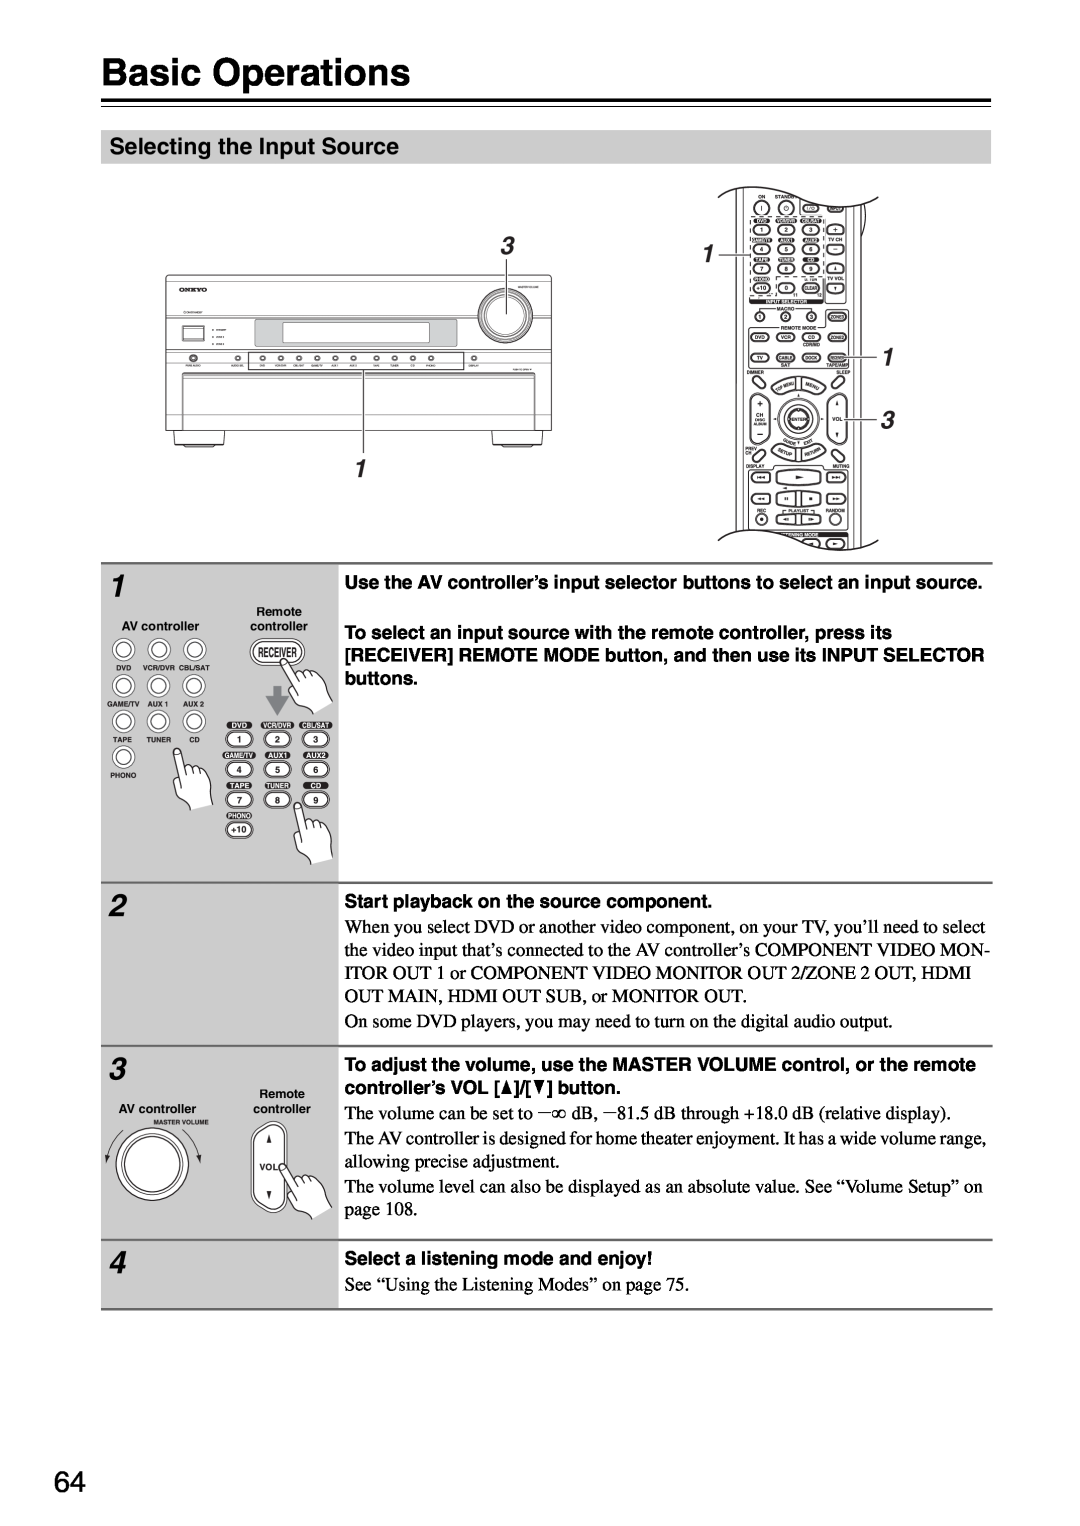 Onkyo PR-SC886 instruction manual Basic Operations, Selecting the Input Source 